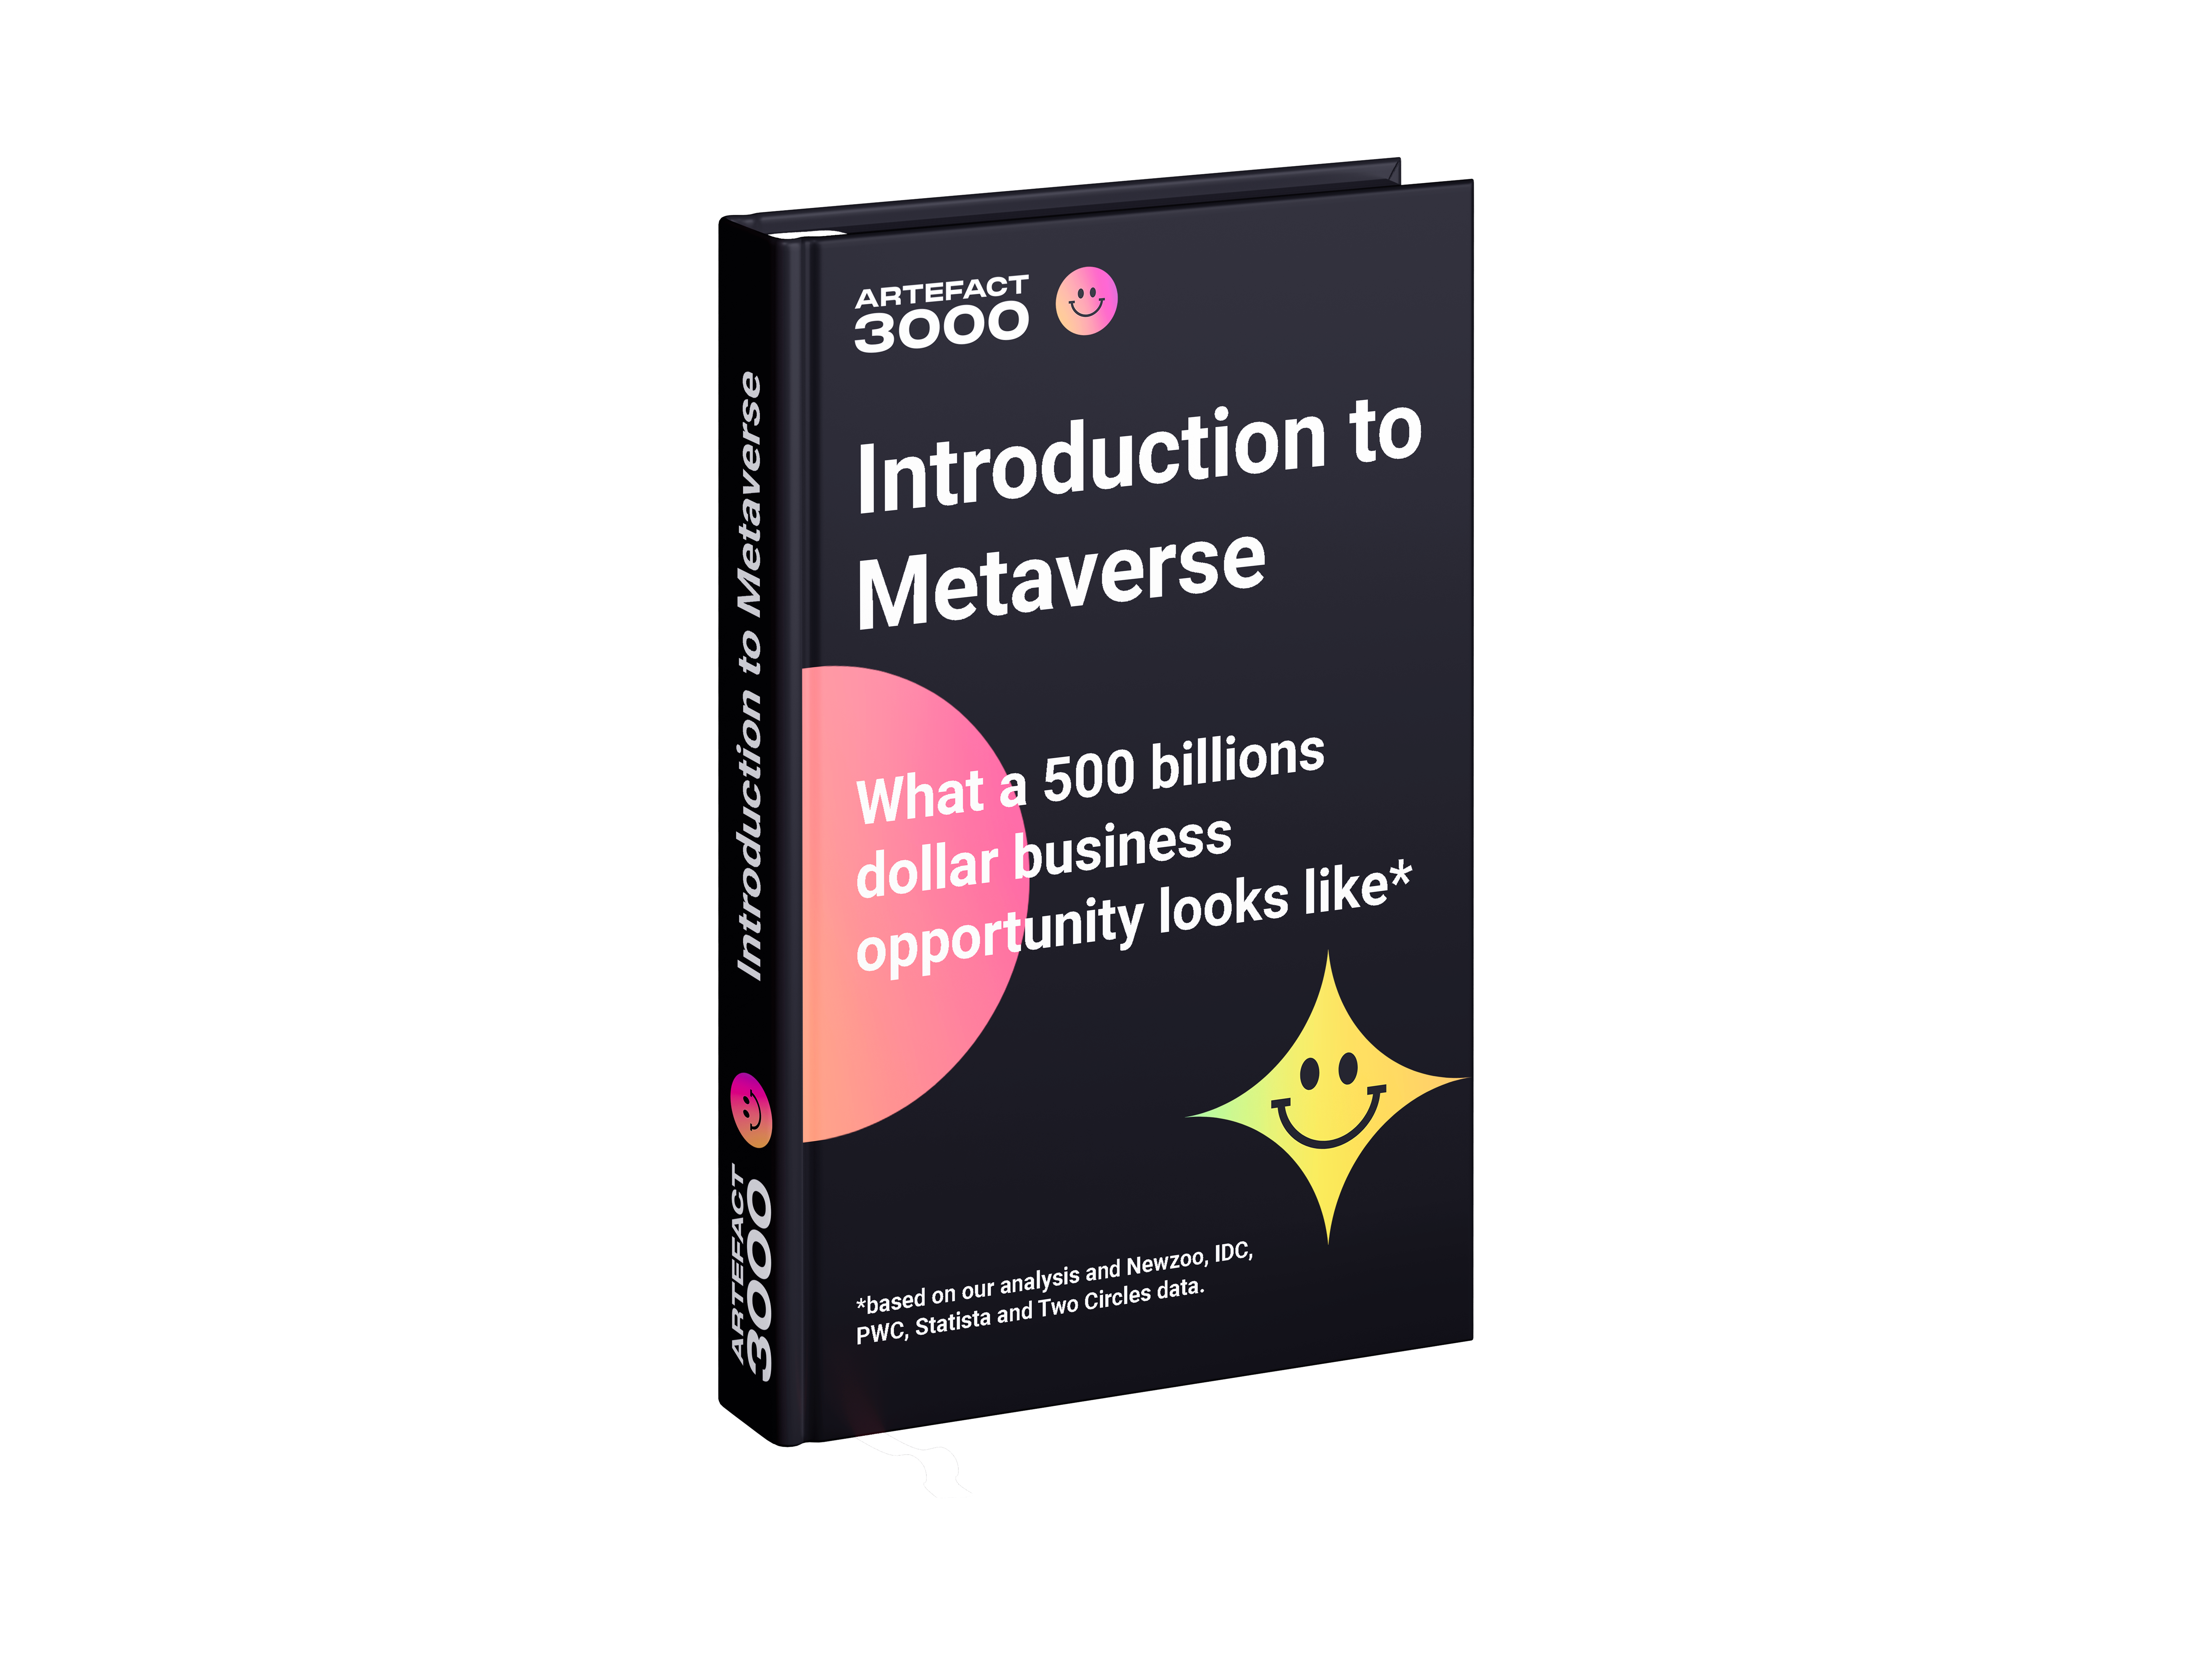 Artefact 3000 Guide - Introduction to Metaverse